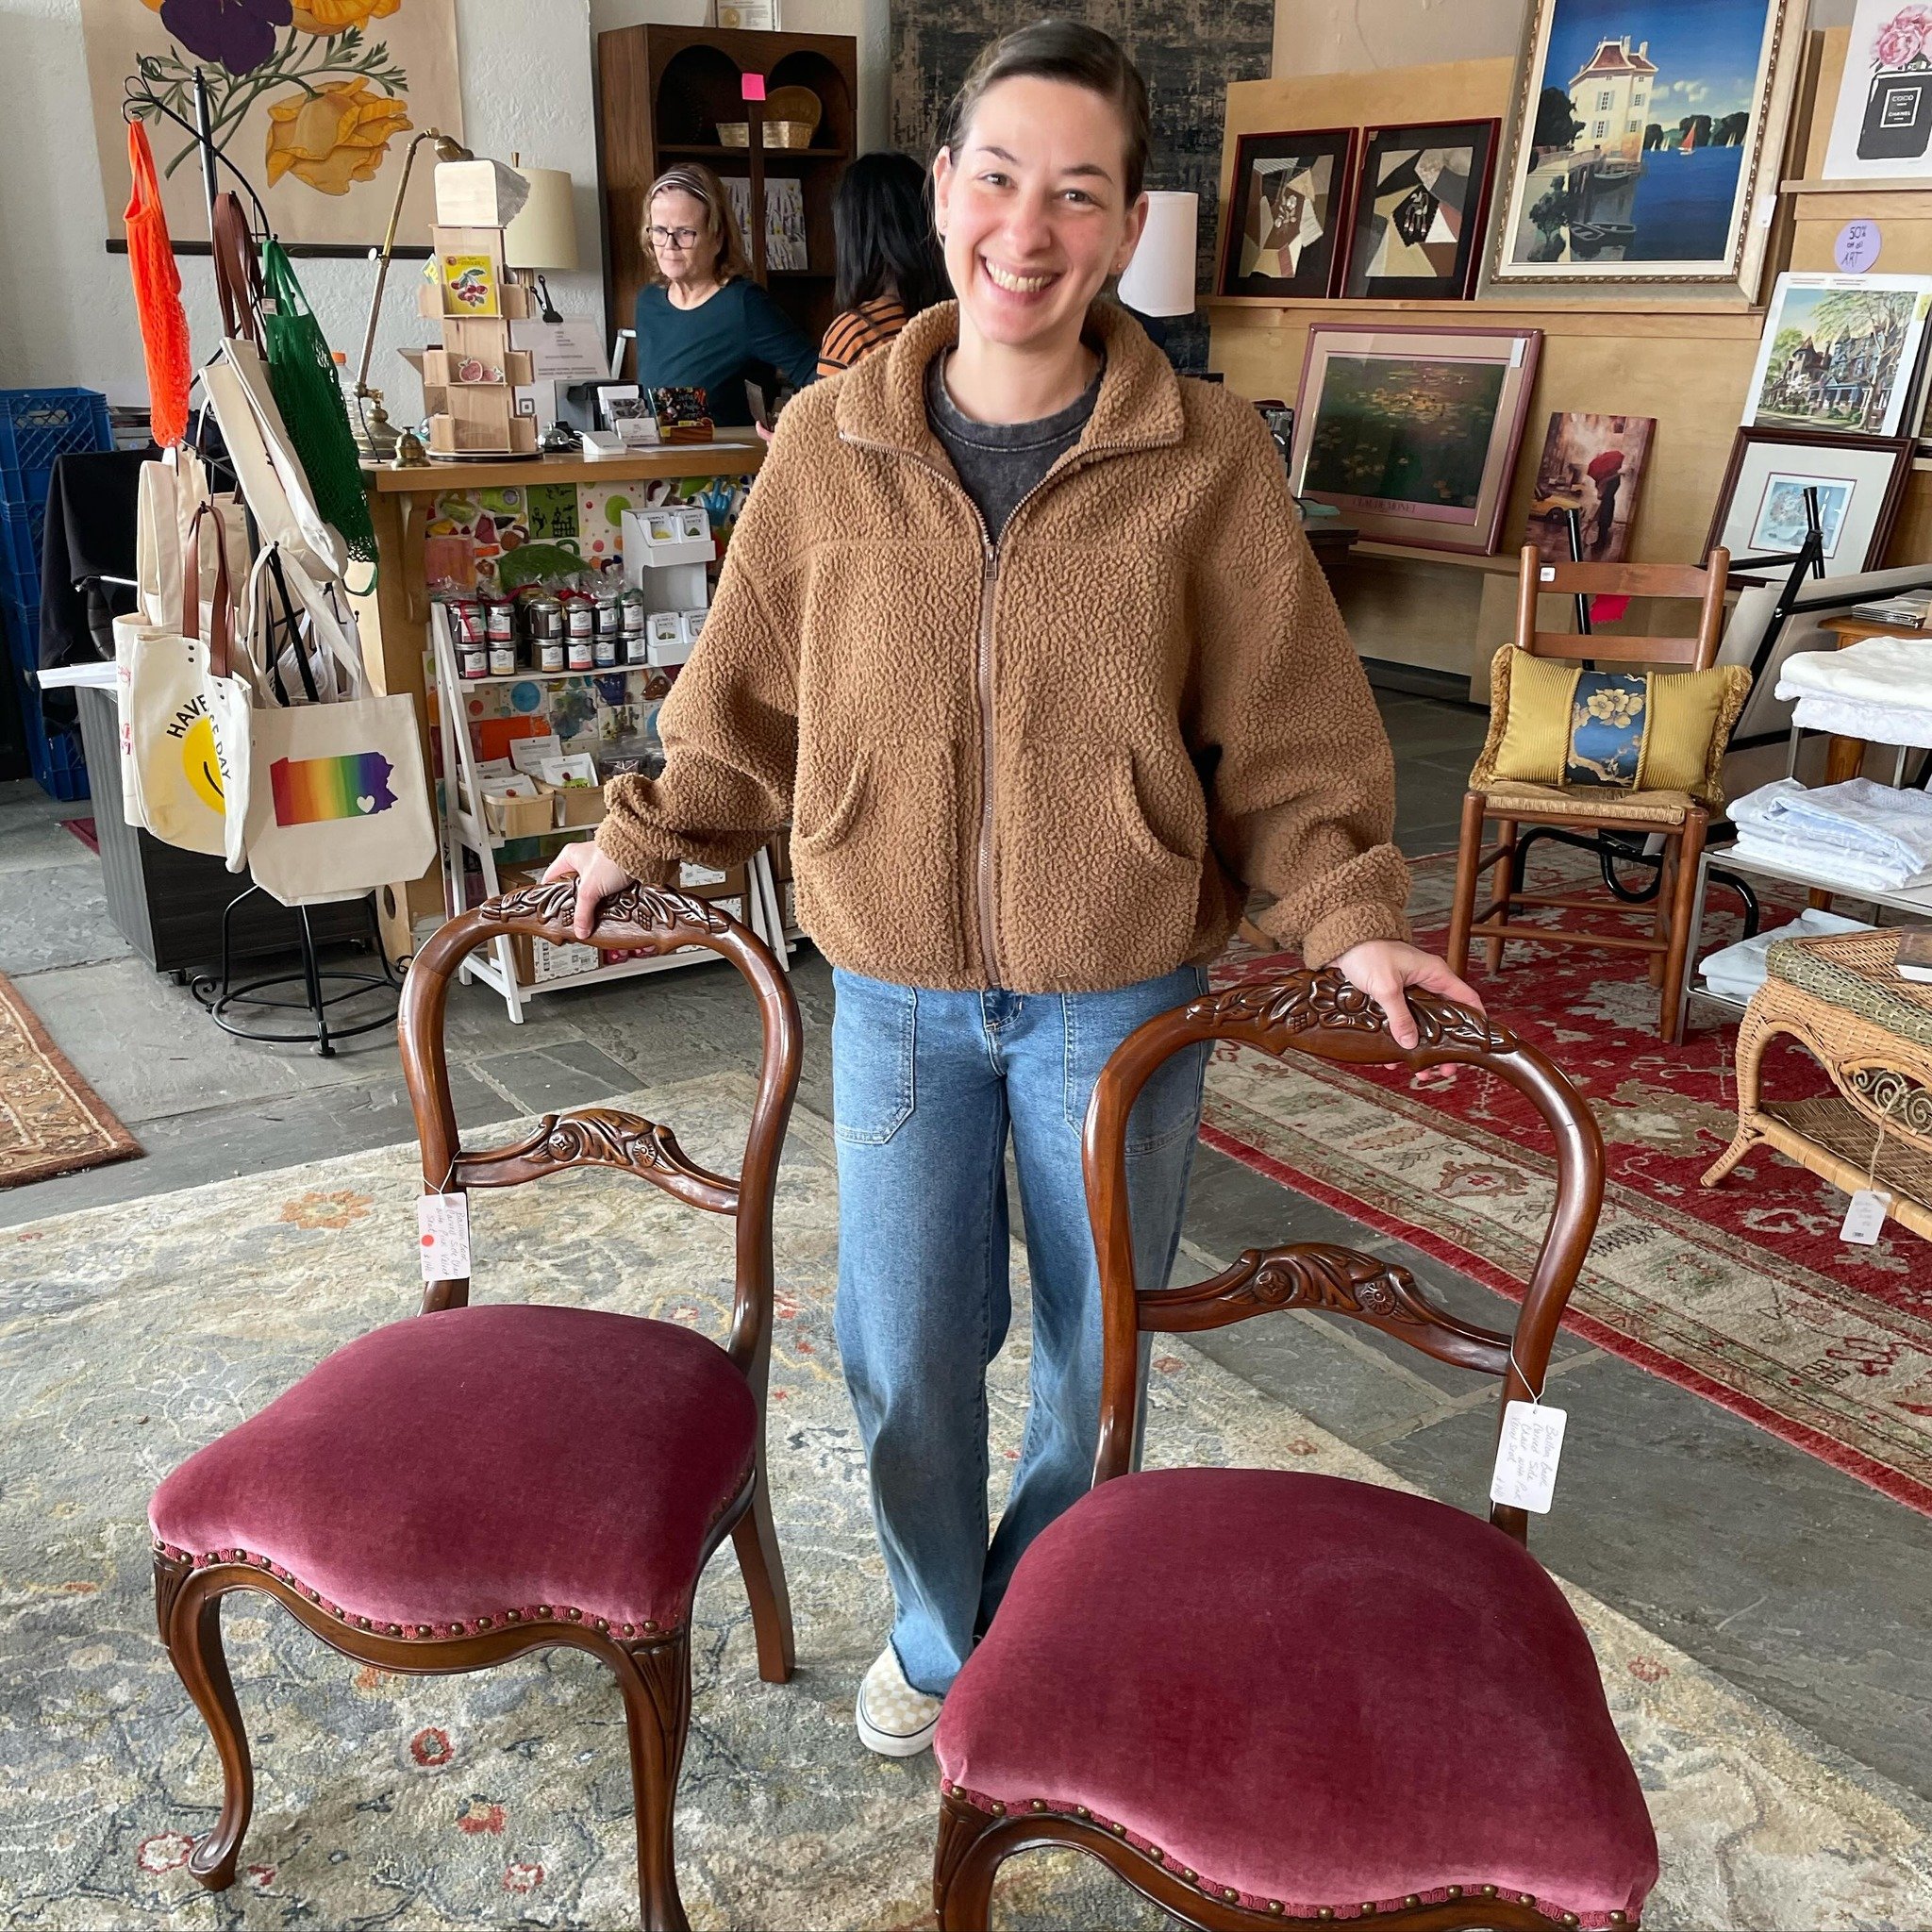 These beauties found a home! 

#shopvintage #shoplocal #lansdalepa #vintagestyle #vintafedecor #buyused #supportlocal